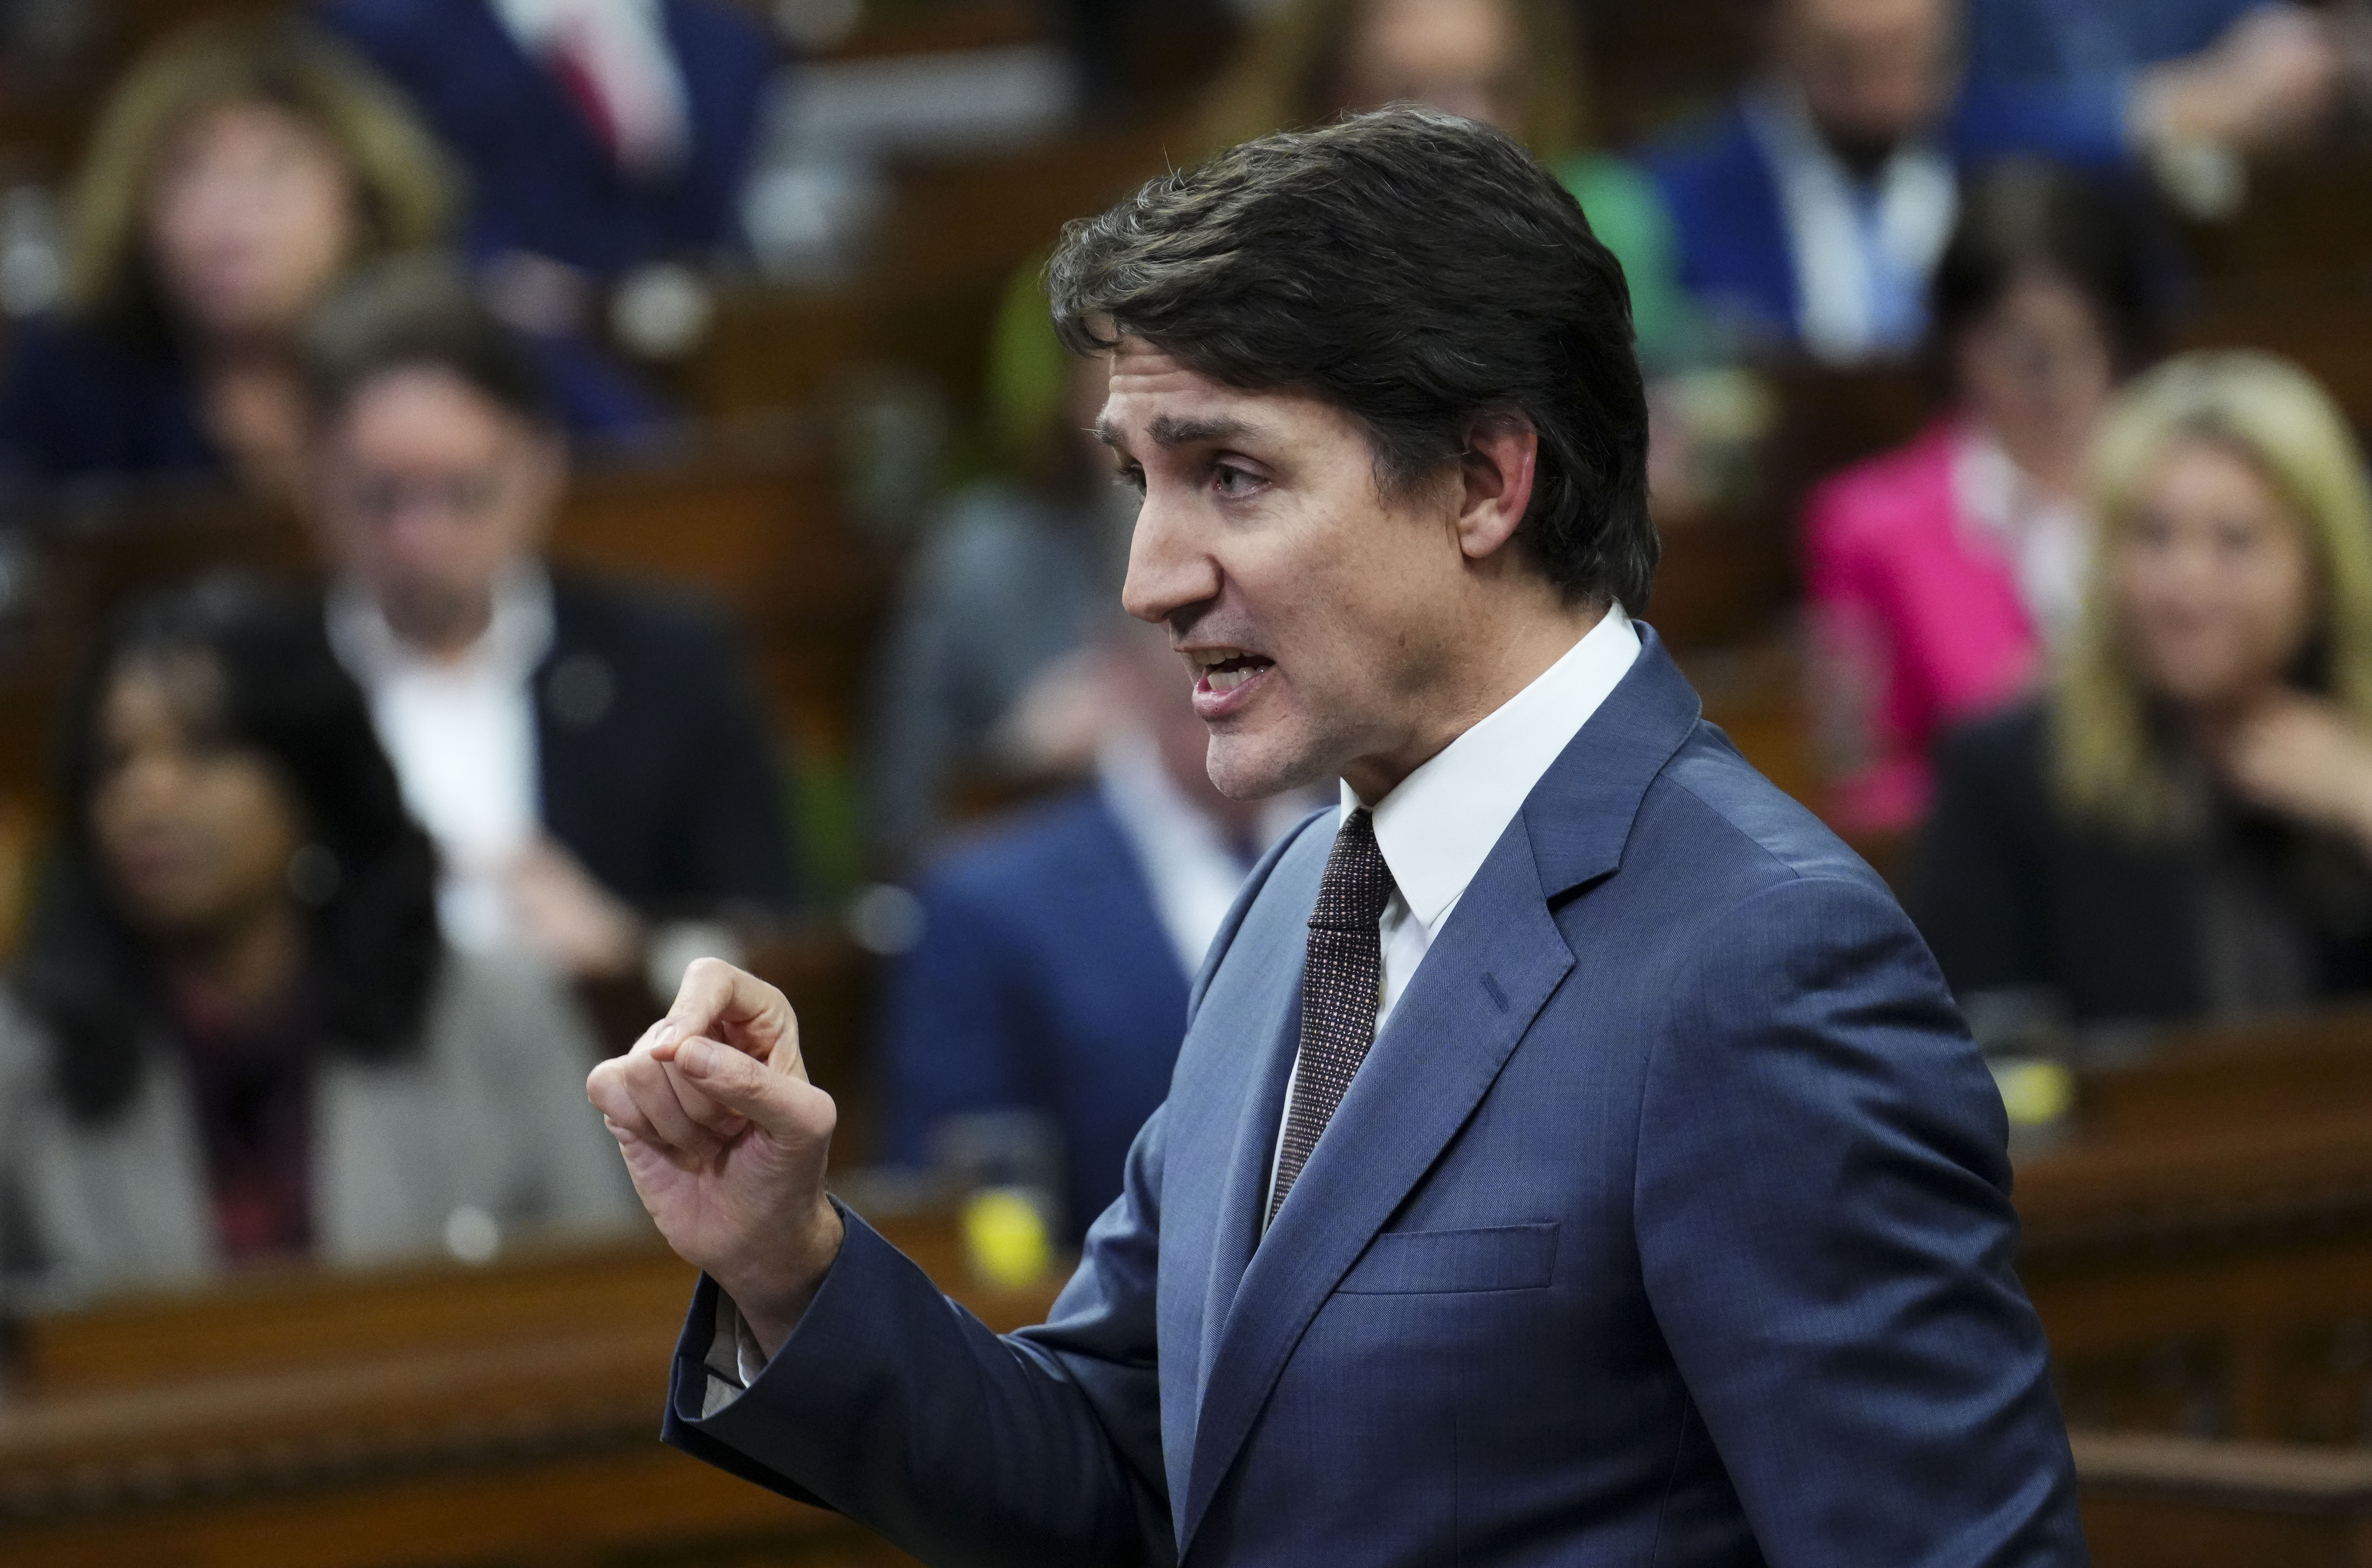 Trudeau calls Bell layoffs a ‘garbage decision’: ‘I’m pretty pissed off’